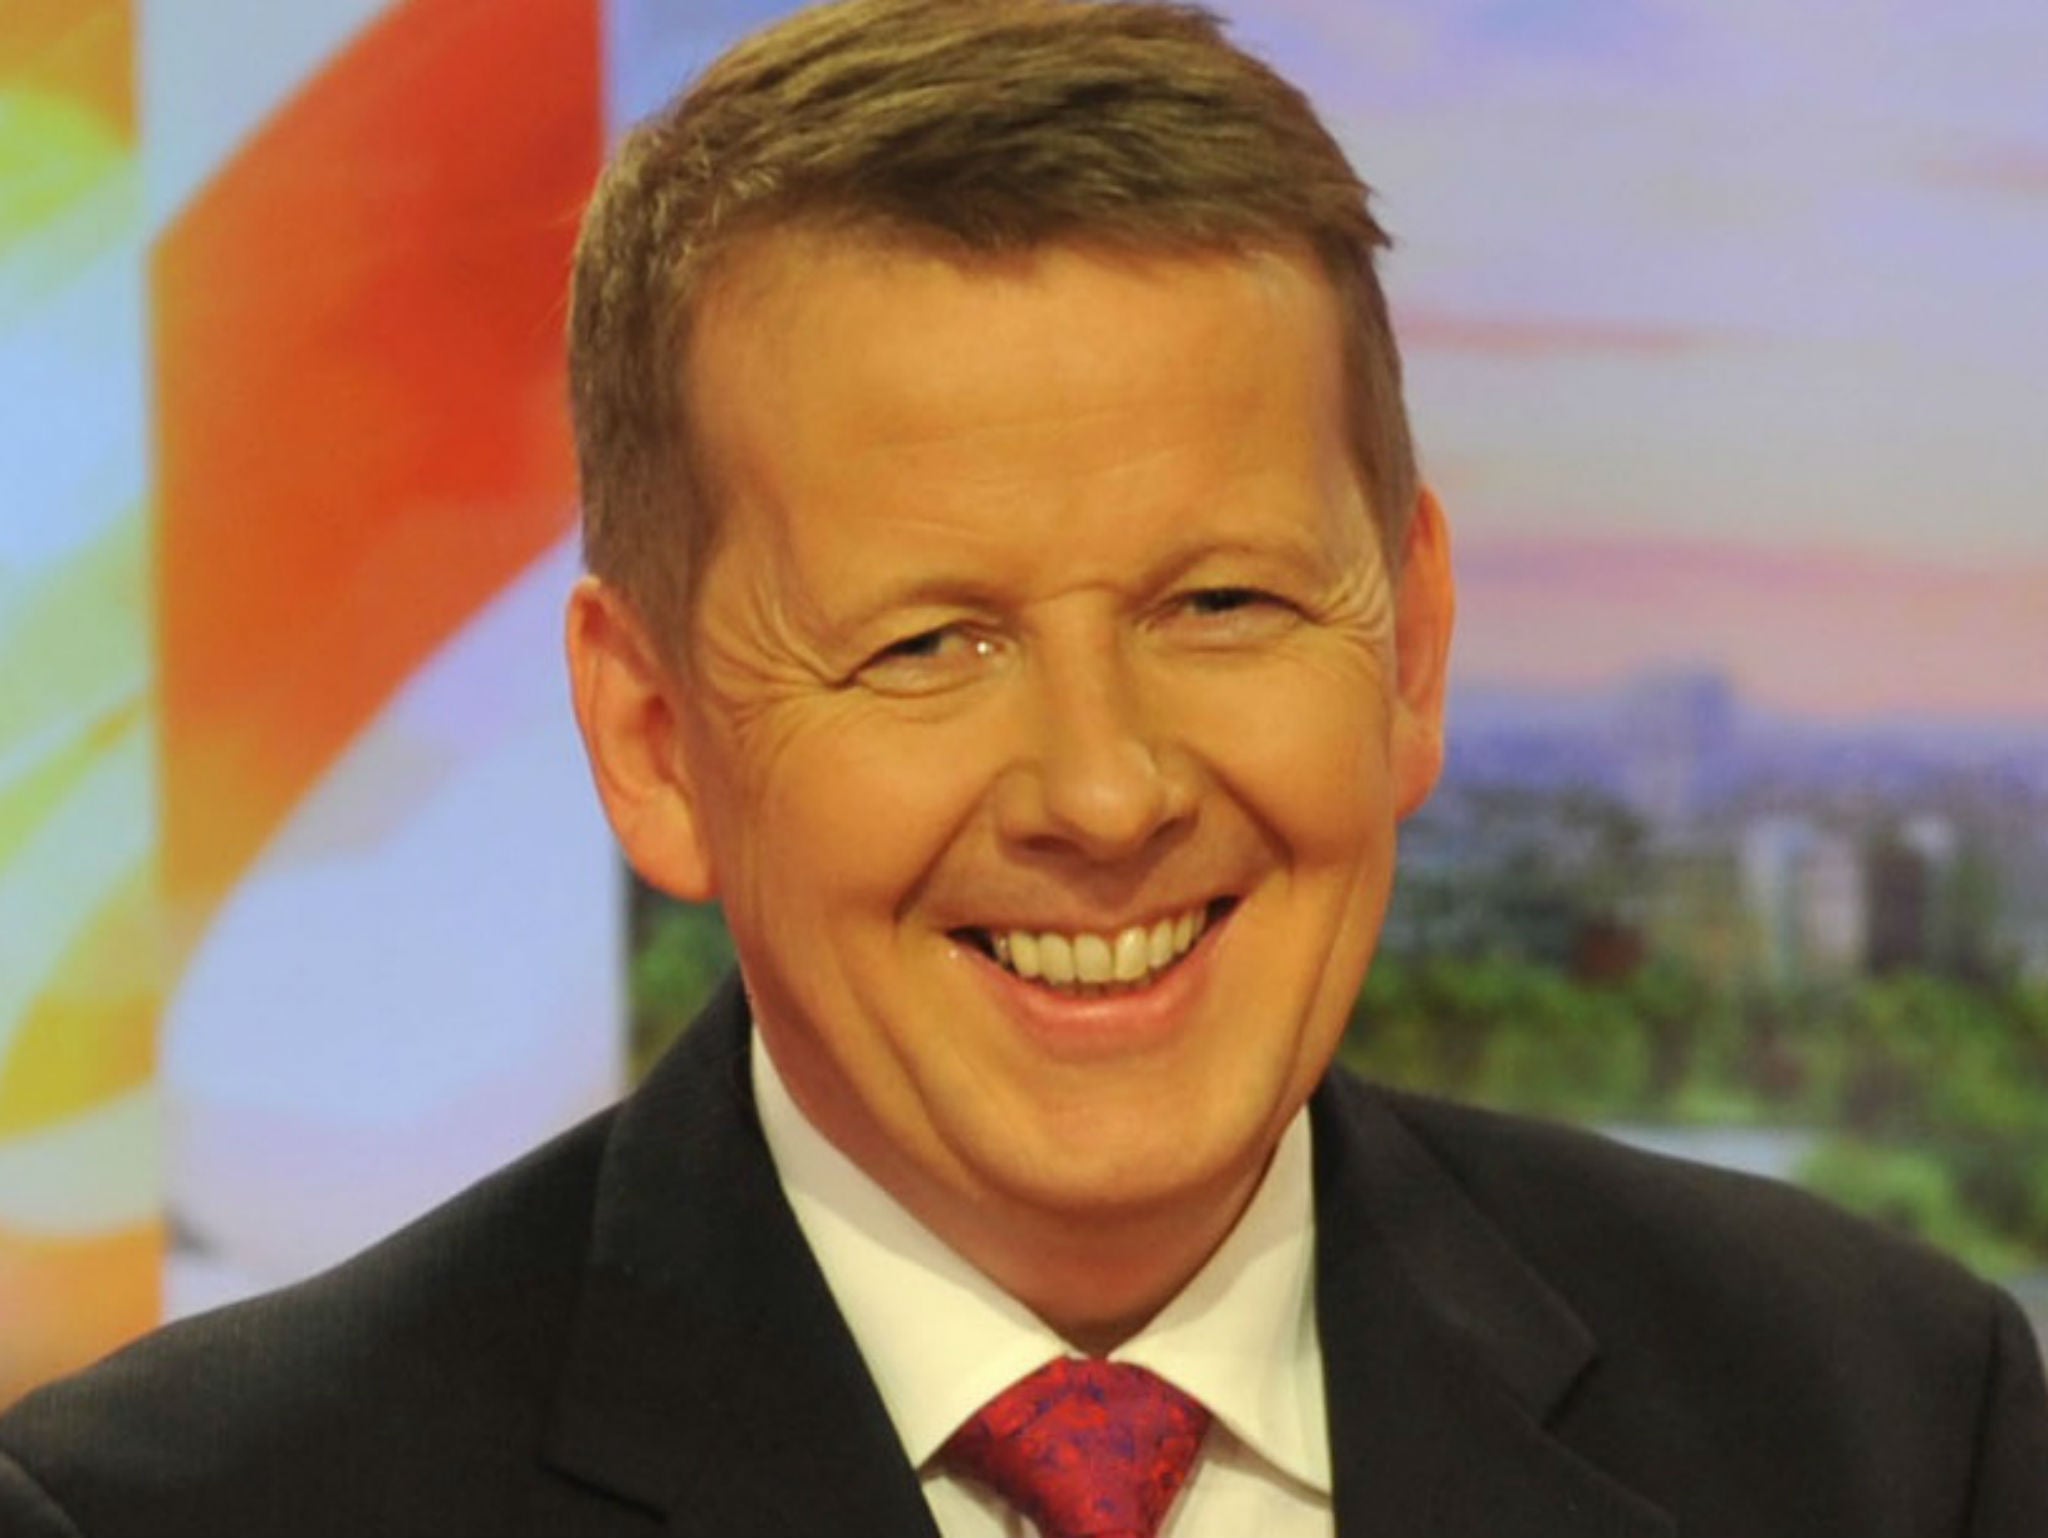 BBC Breakfast presenter Bill Turner is stepping down after 15 years